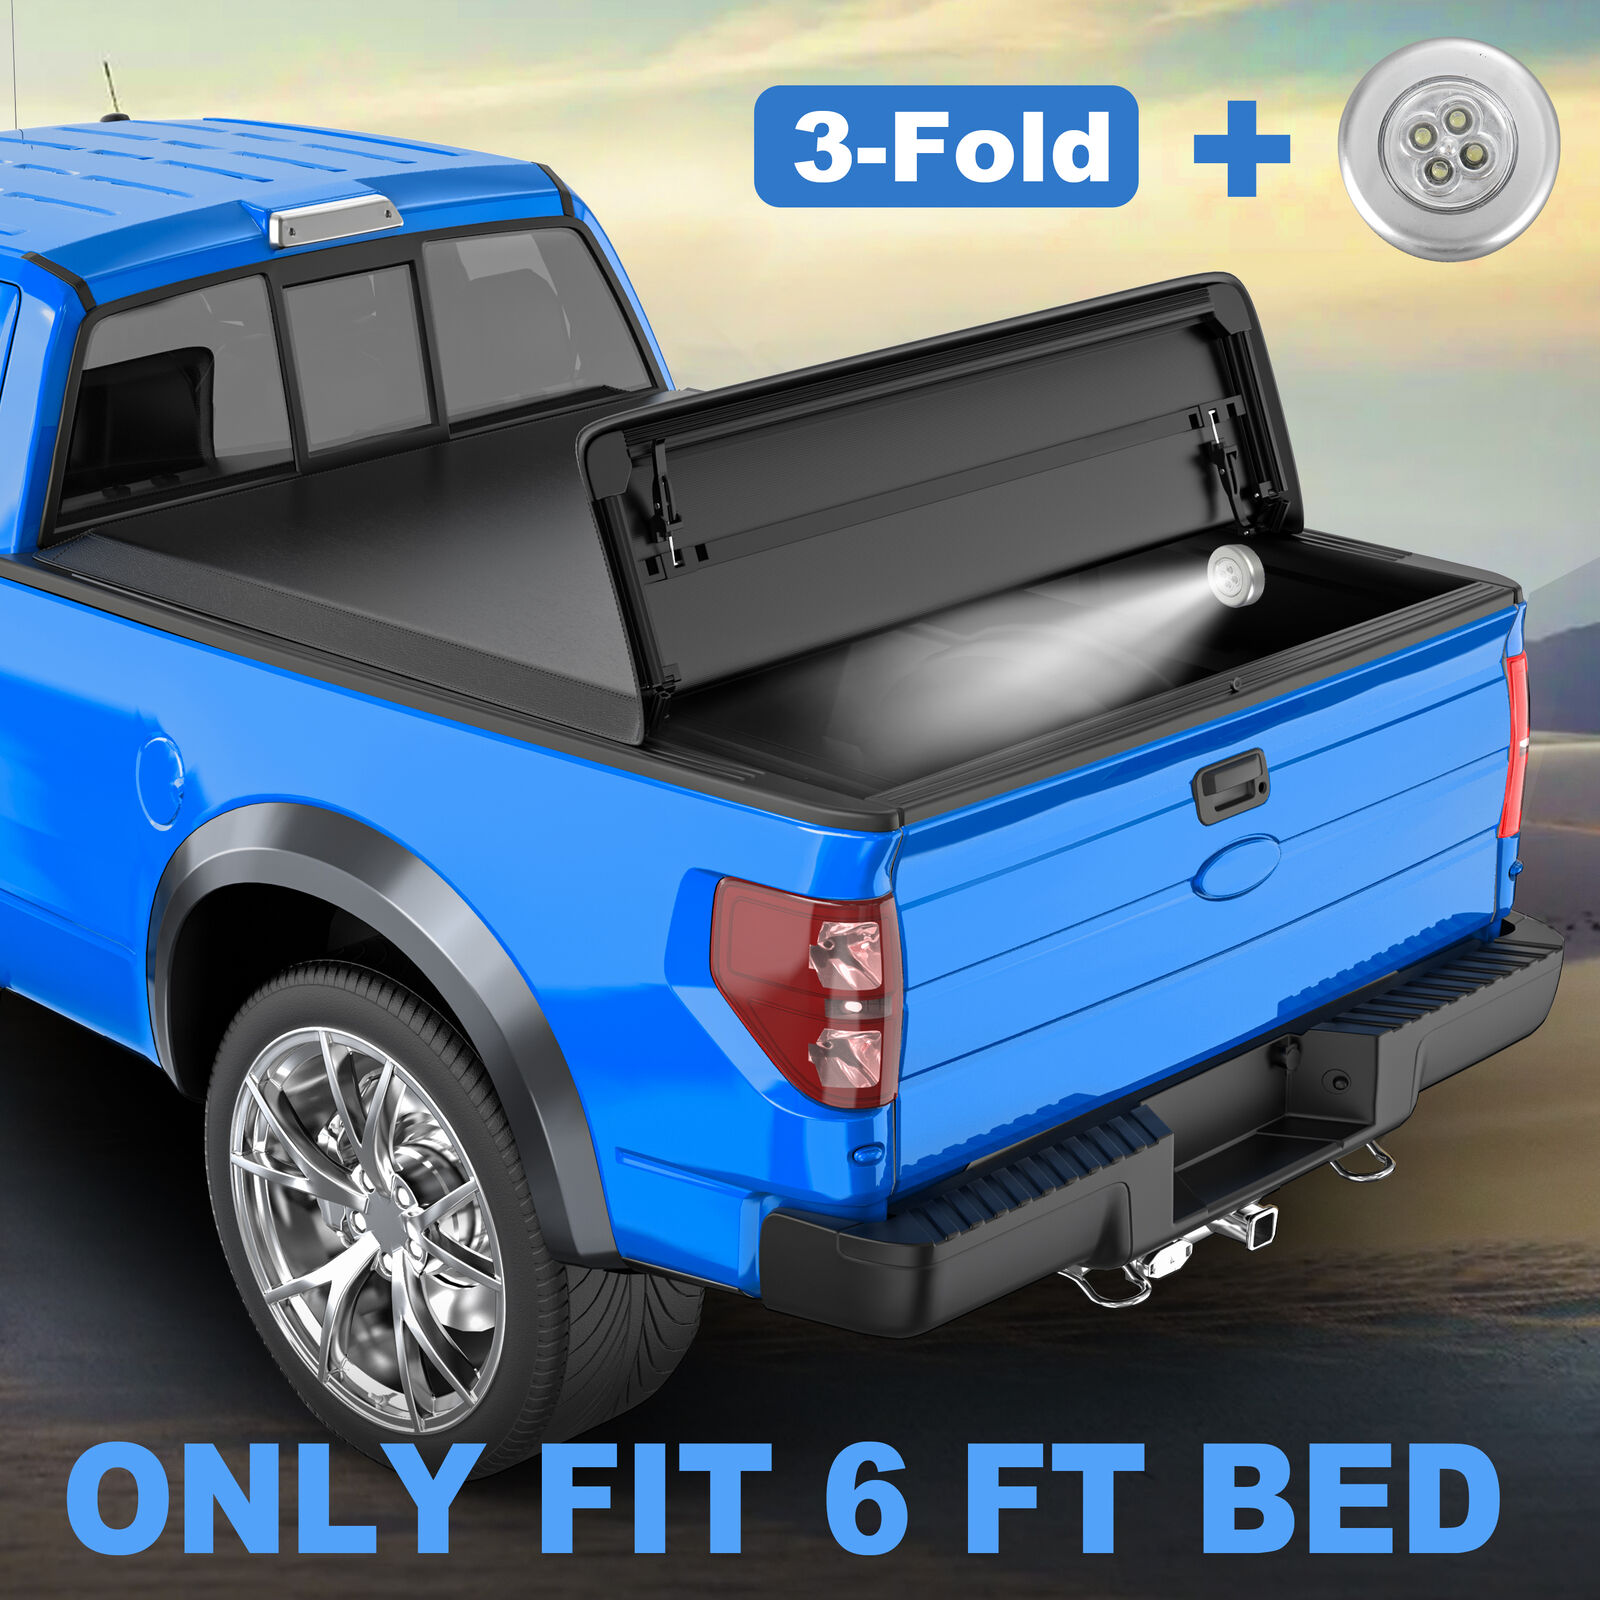 6FT Bed 3-Fold Tonneau Cover For 2005-2015 Toyota Tacoma Truck w/Lamp Waterproof